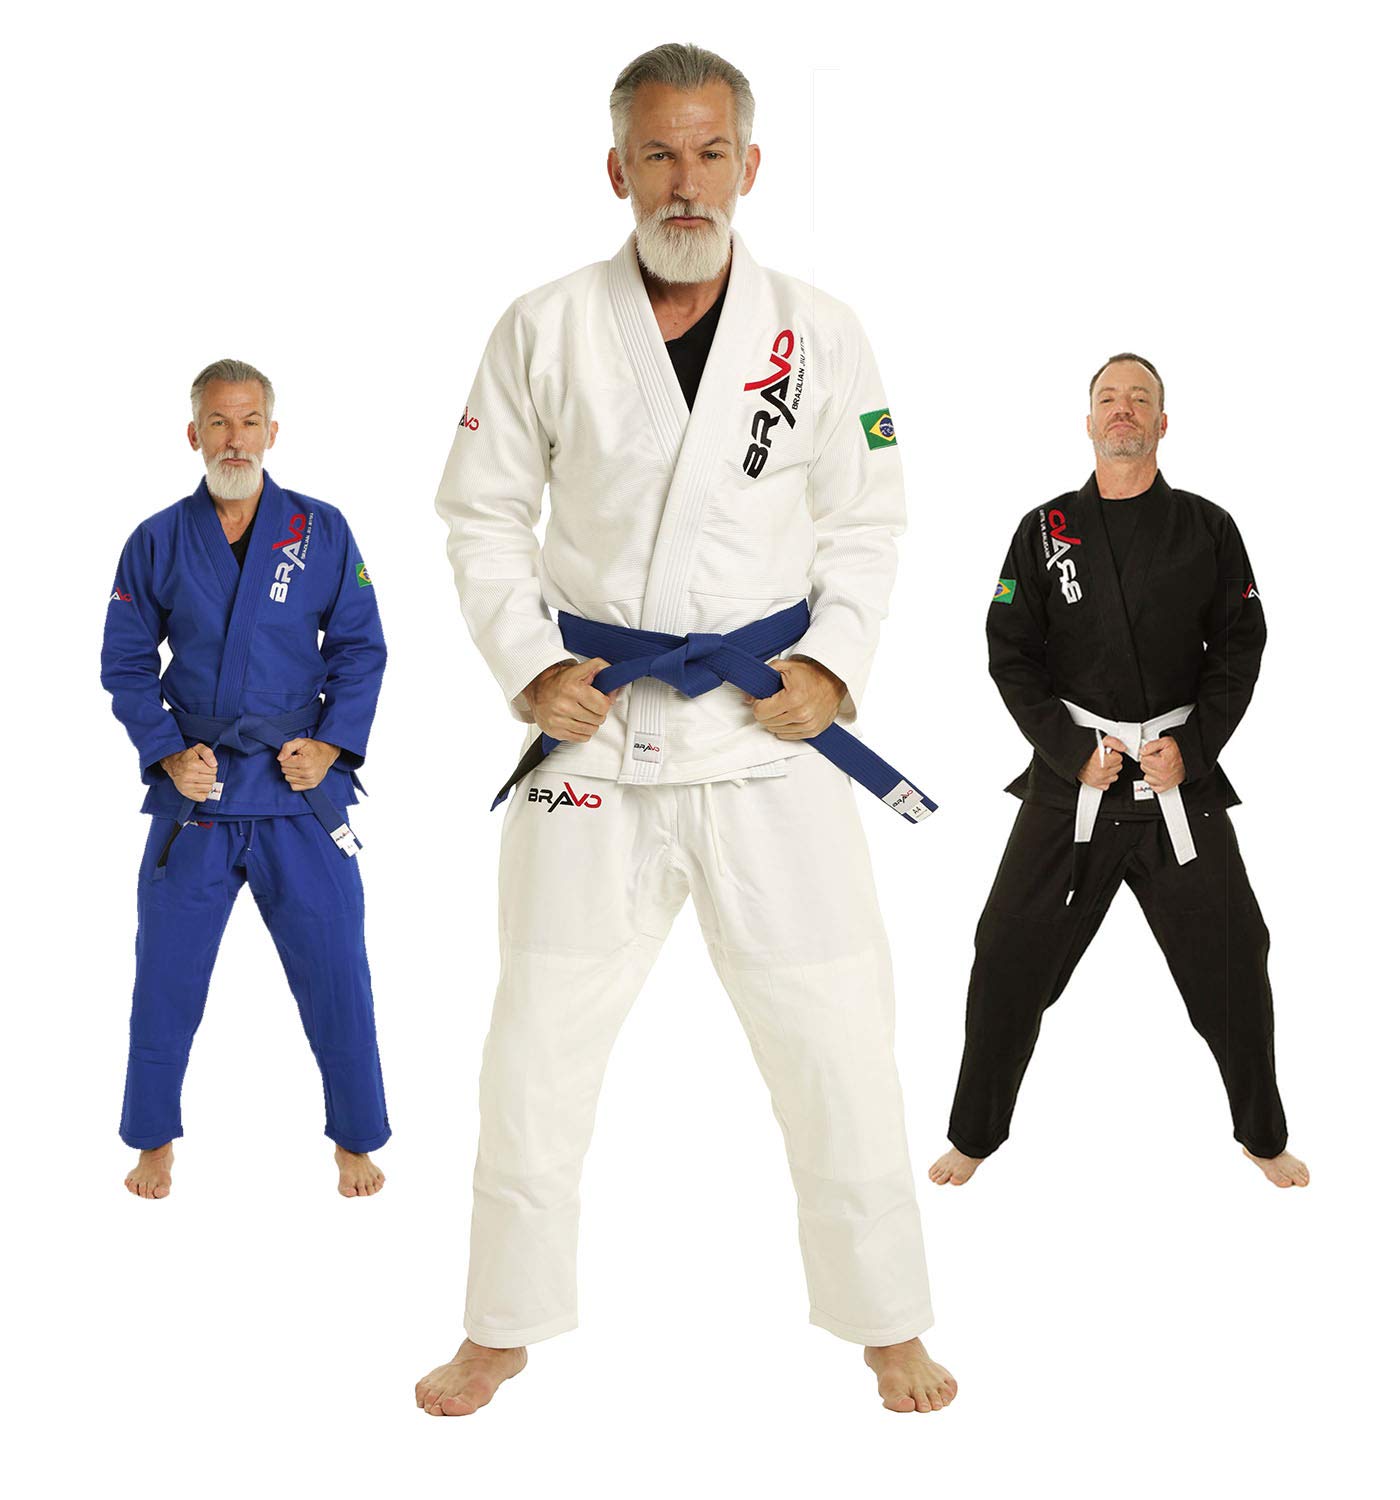 Perfect gi - A Complete Buyer Guide to Choose your gi